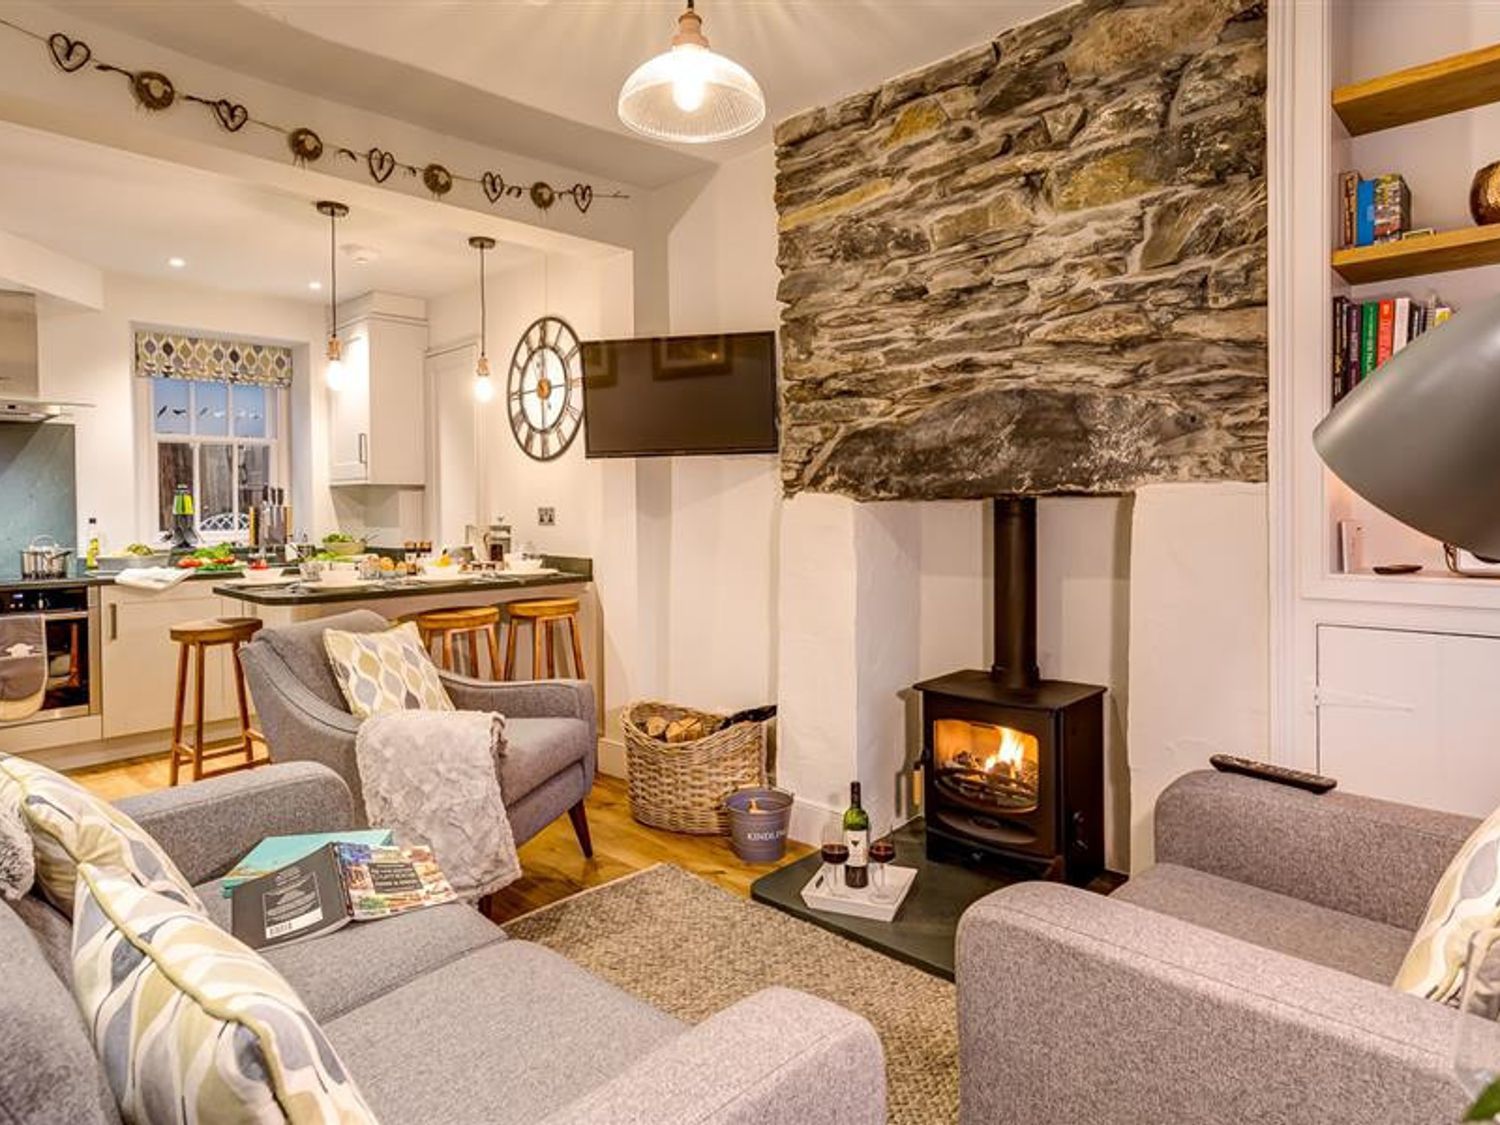 Cosy Cottage - Lake District - 1145464 - photo 1